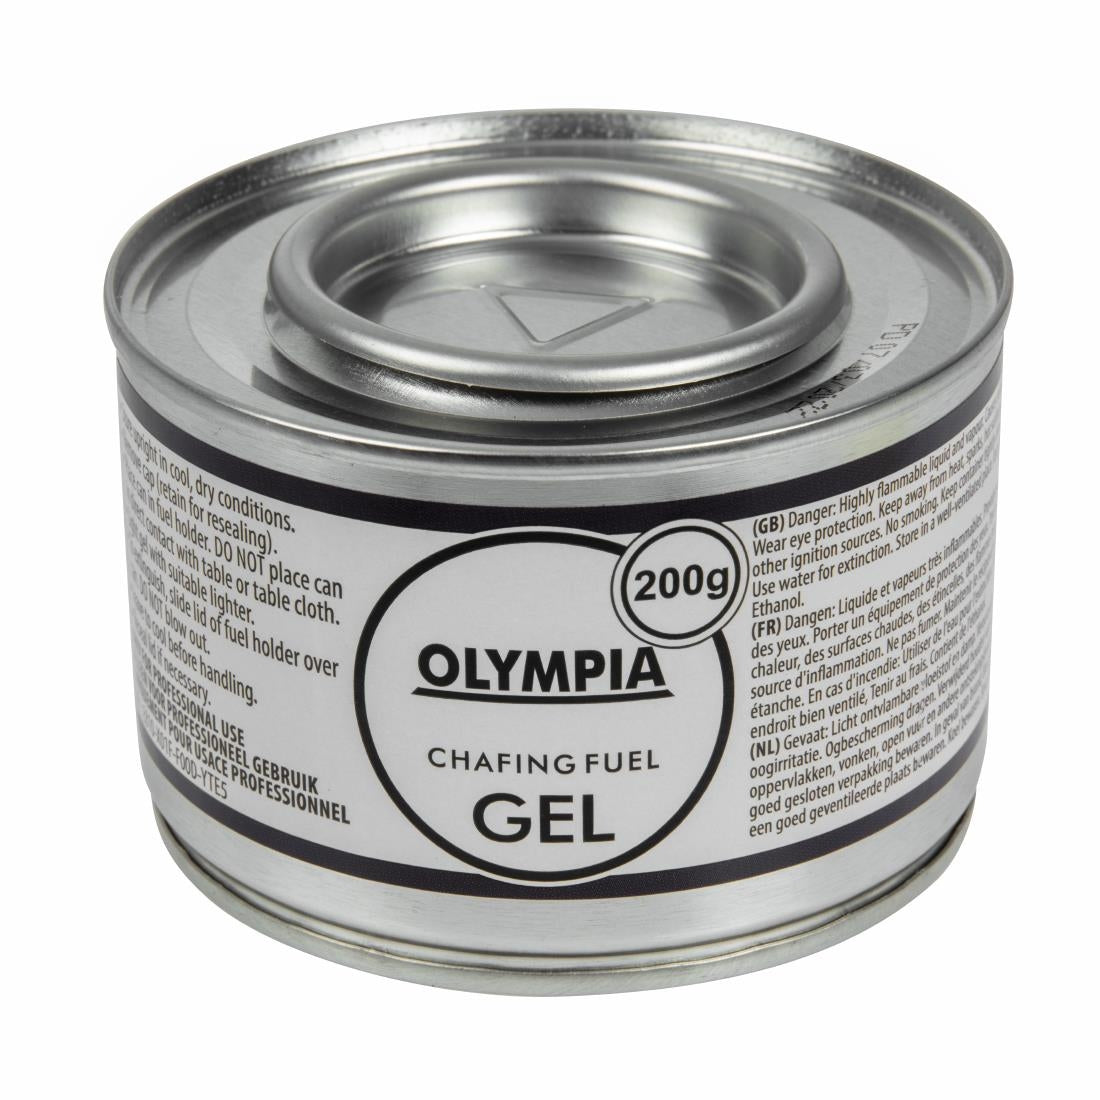 CE241 Olympia Gel Chafing Fuel 2 Hour (Pack of 12)